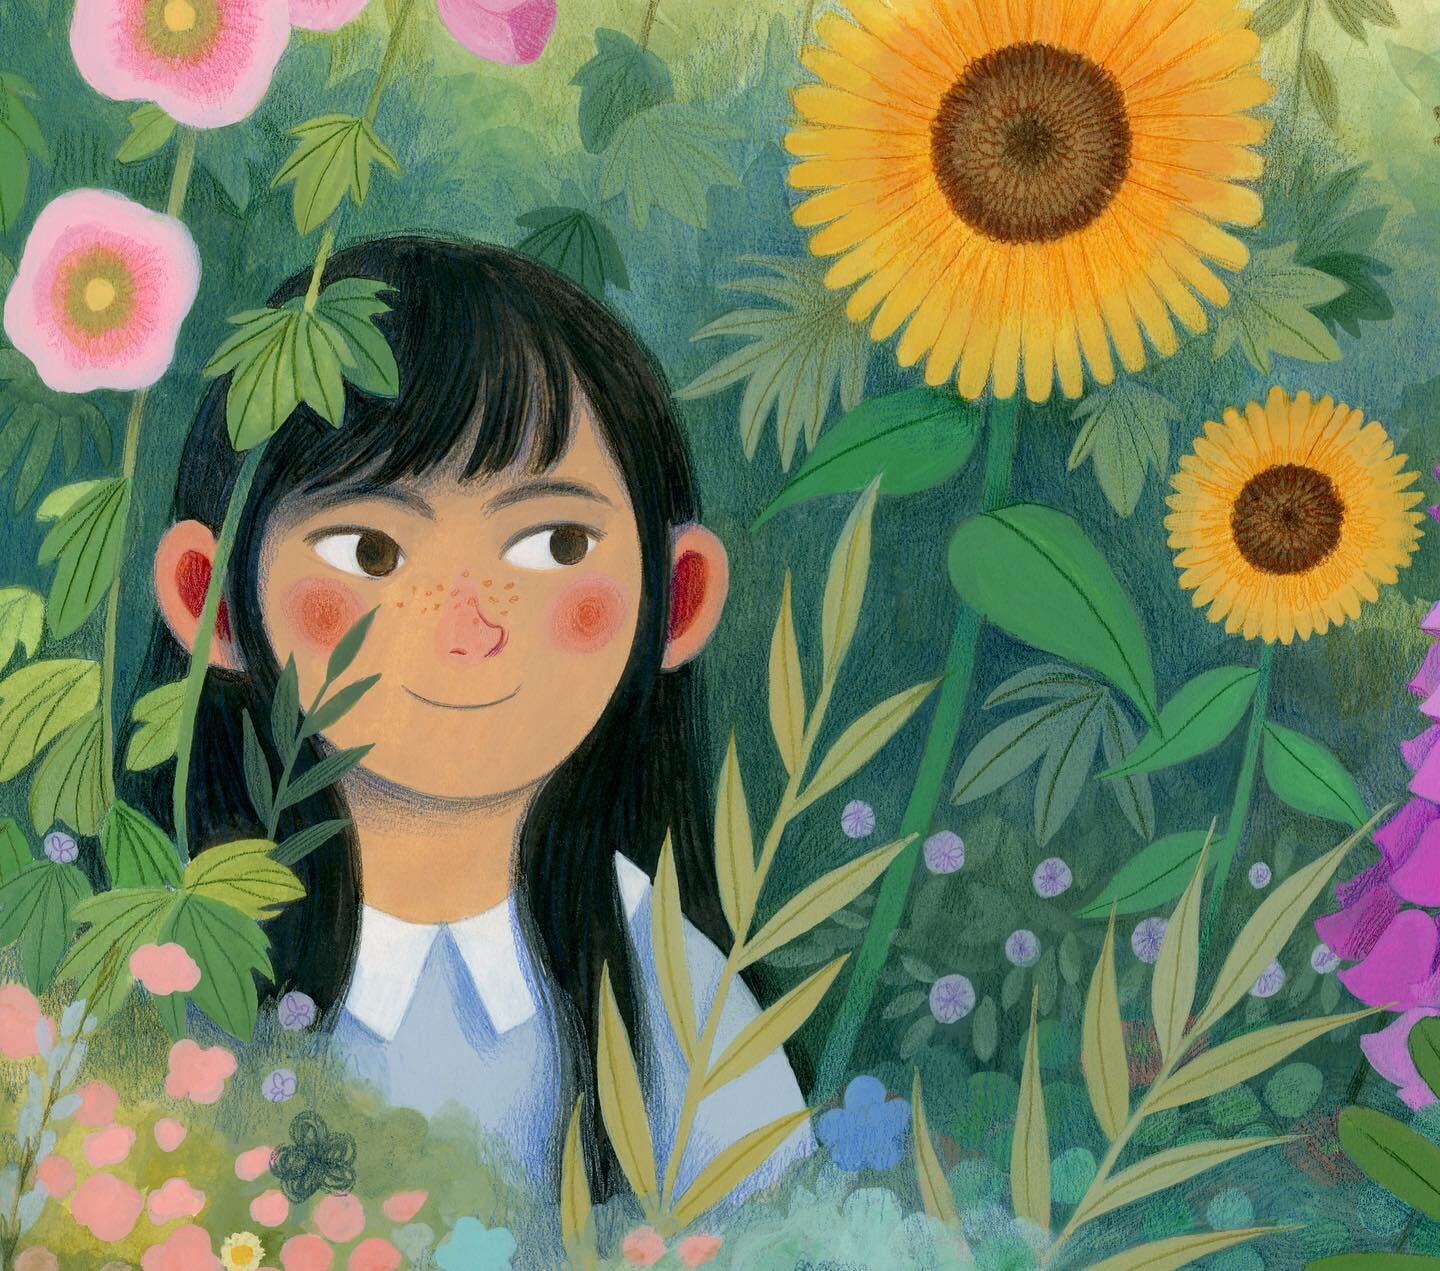 Happy Friday! I hope it&rsquo;s blooming where you are 🌷🌻🌸🌺🌼🌷
.
.
#illustration #kidlitart #gouacheillustration #kidlit #springtime #floral #holbeingouache #fabercastellpolychromos #sunflowers #picturebookart #womenwhoillustrate